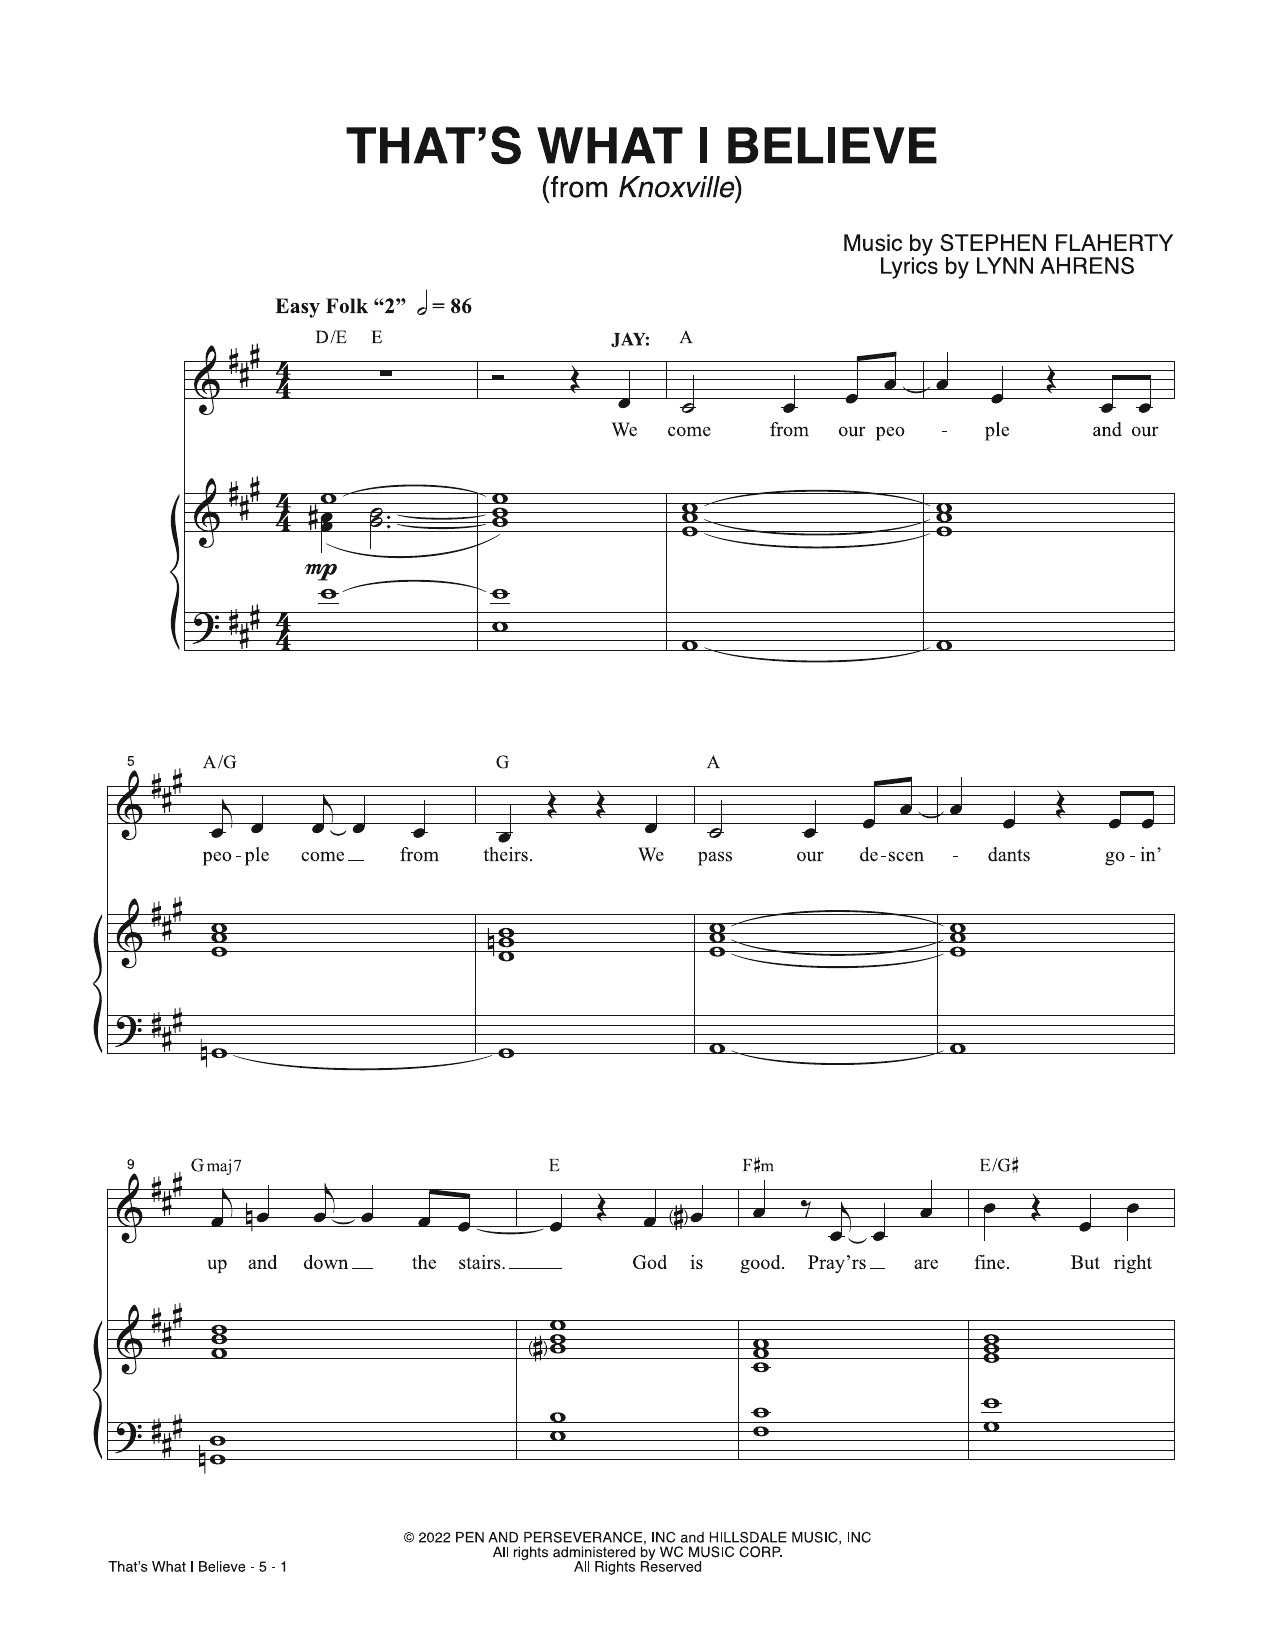 Lynn Ahrens & Stephen Flaherty That's What I Believe (from Knoxville) sheet music notes printable PDF score